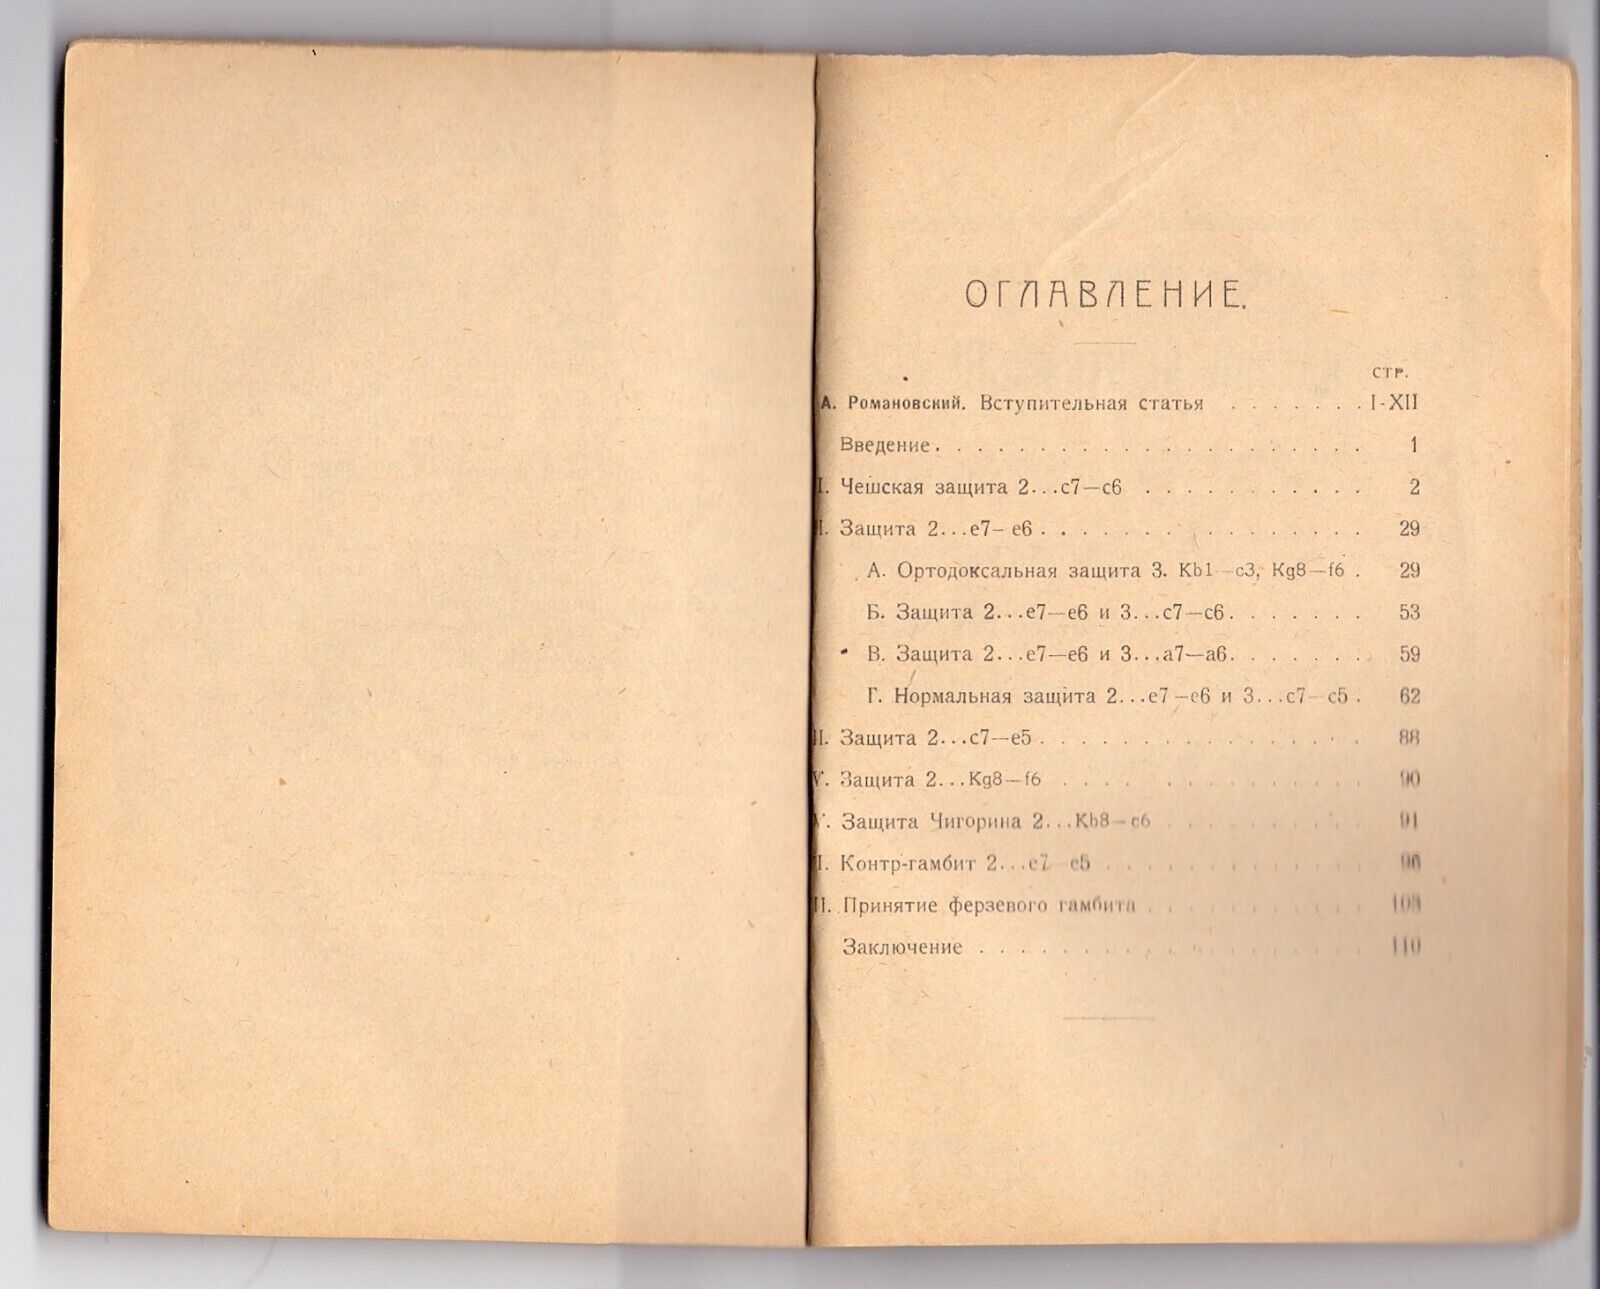 11539.Russian chess book: S. Tarrasch. 1925.Protection of the Queen's gambit